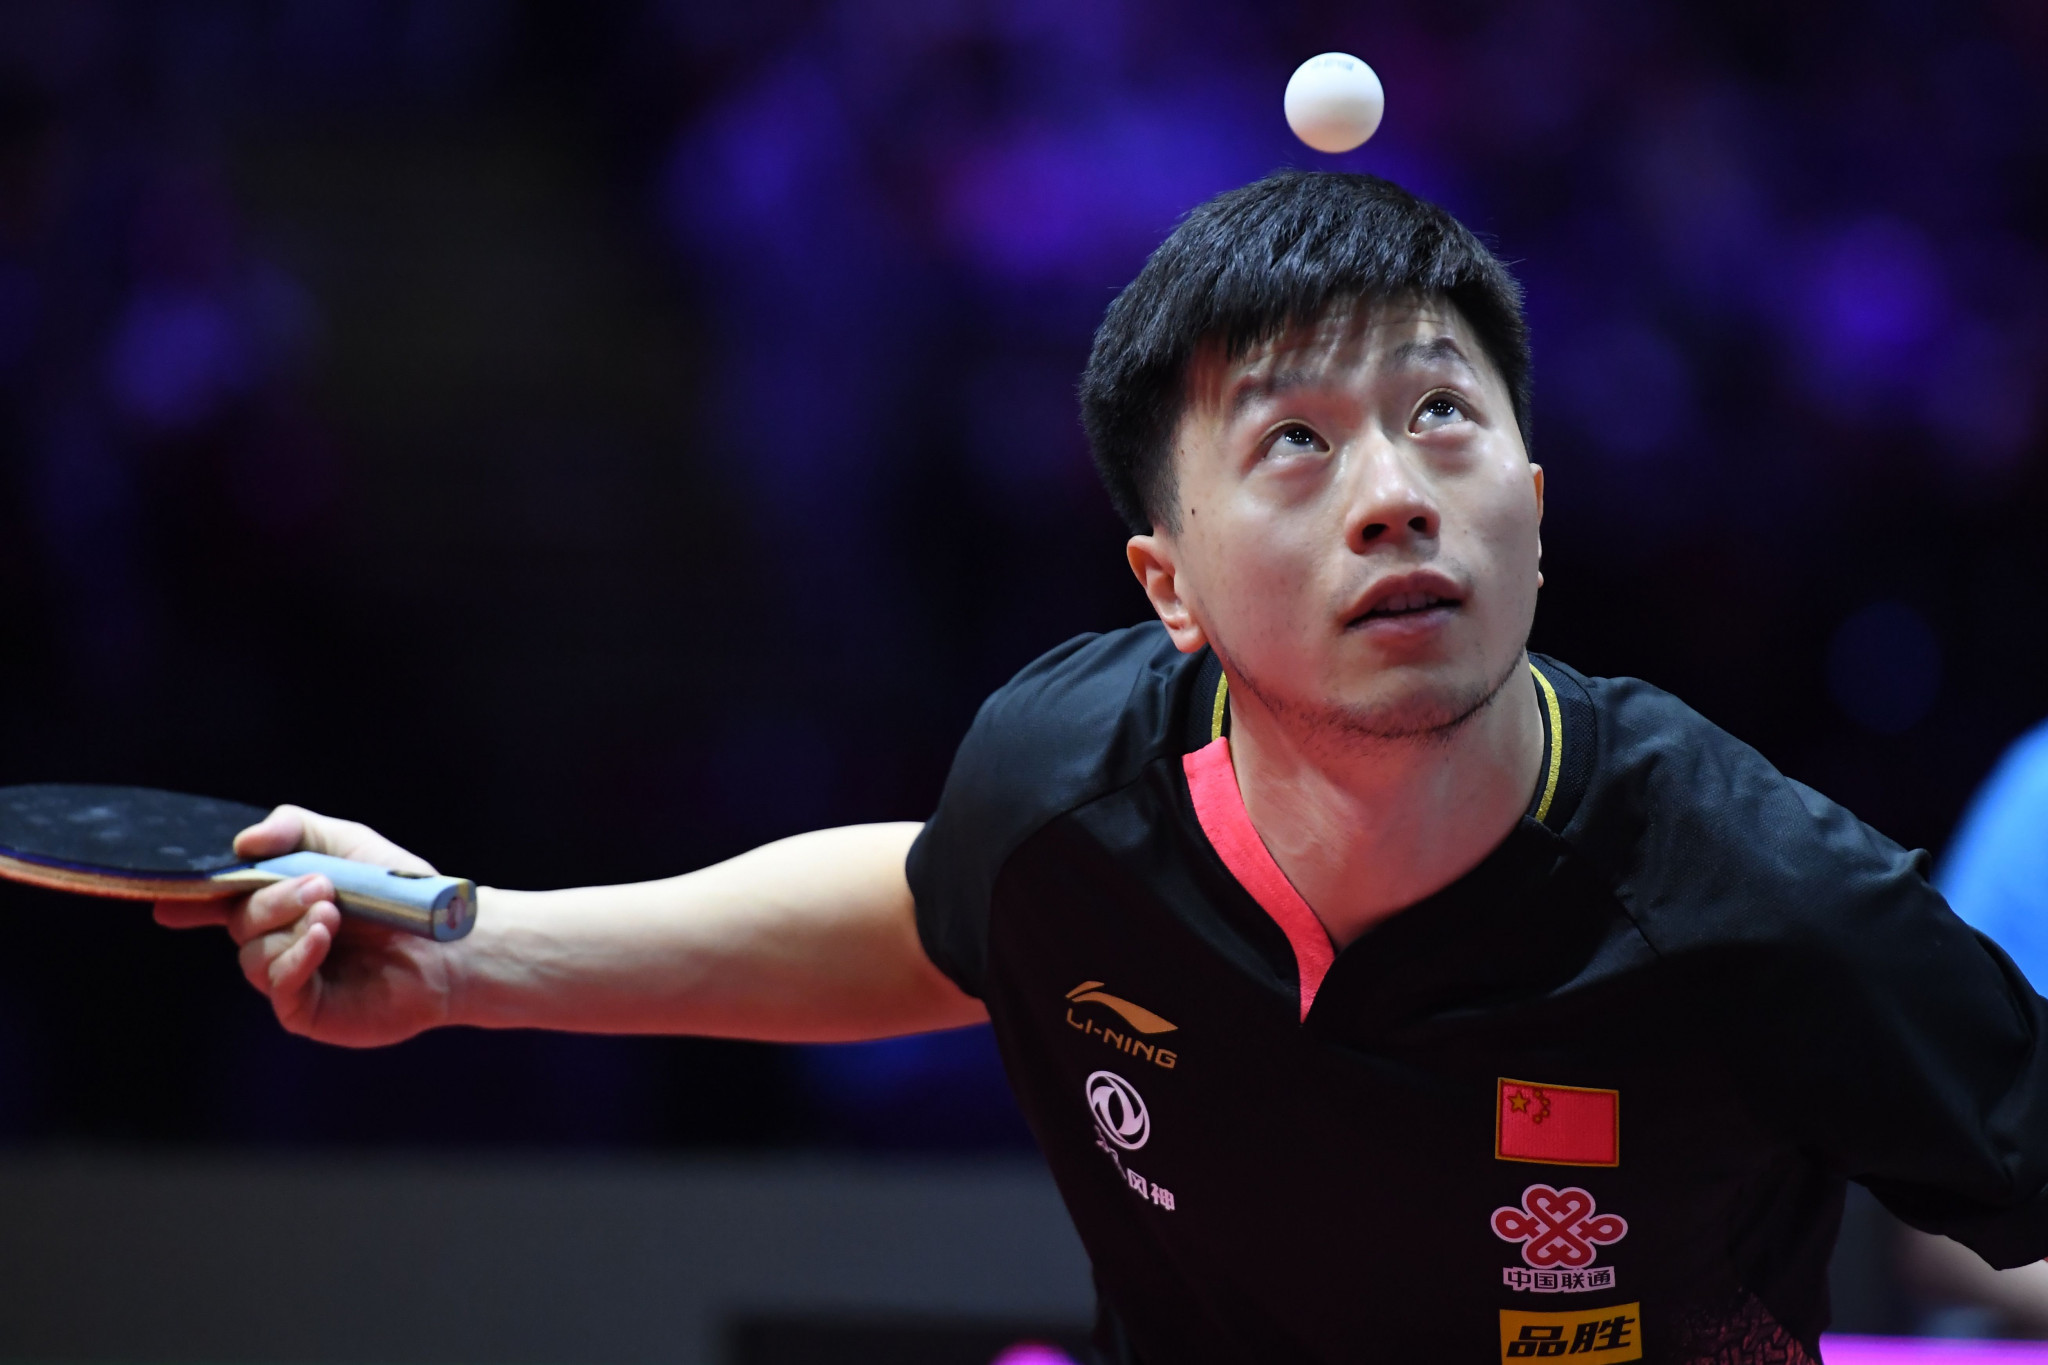 This year's ITTF World Championships were held in Budapest, where China's Ma Long successfully defended his men's singles title ©Getty Images